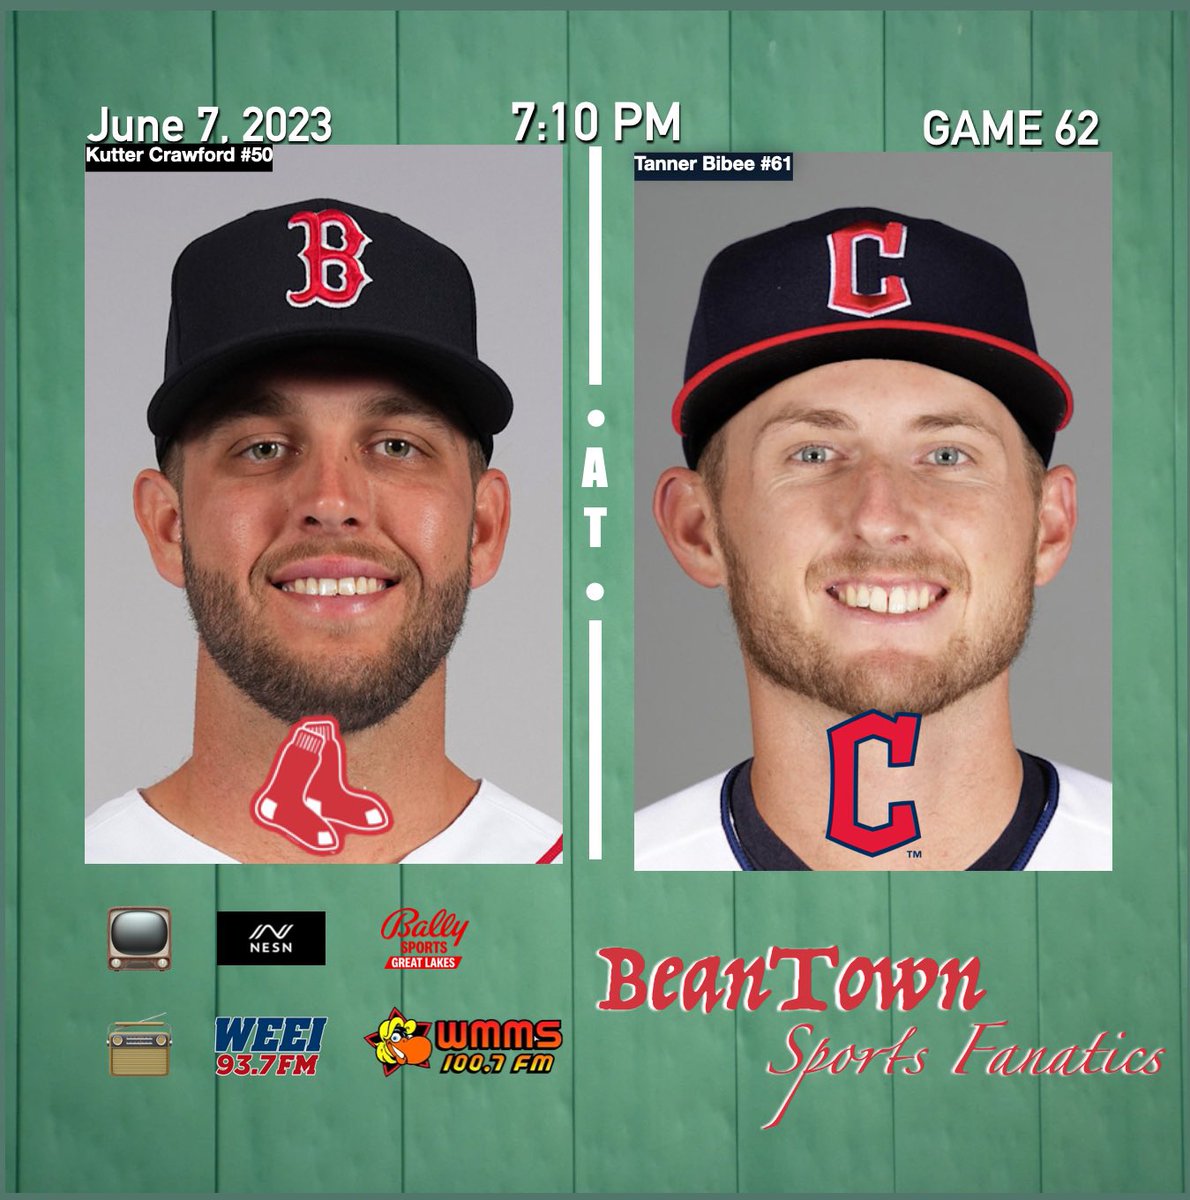 The Swiss Army knife Kutter Crawford is on the mound tonight for the Sox. He will go against Cleveland’s number 2 prospect Tanner Bibee. #BostonRedSox #MLB #RedSoxFan #FenwayPark #Beantown #BostonSports #YankeesSuck #BeanTownSportsFanatics